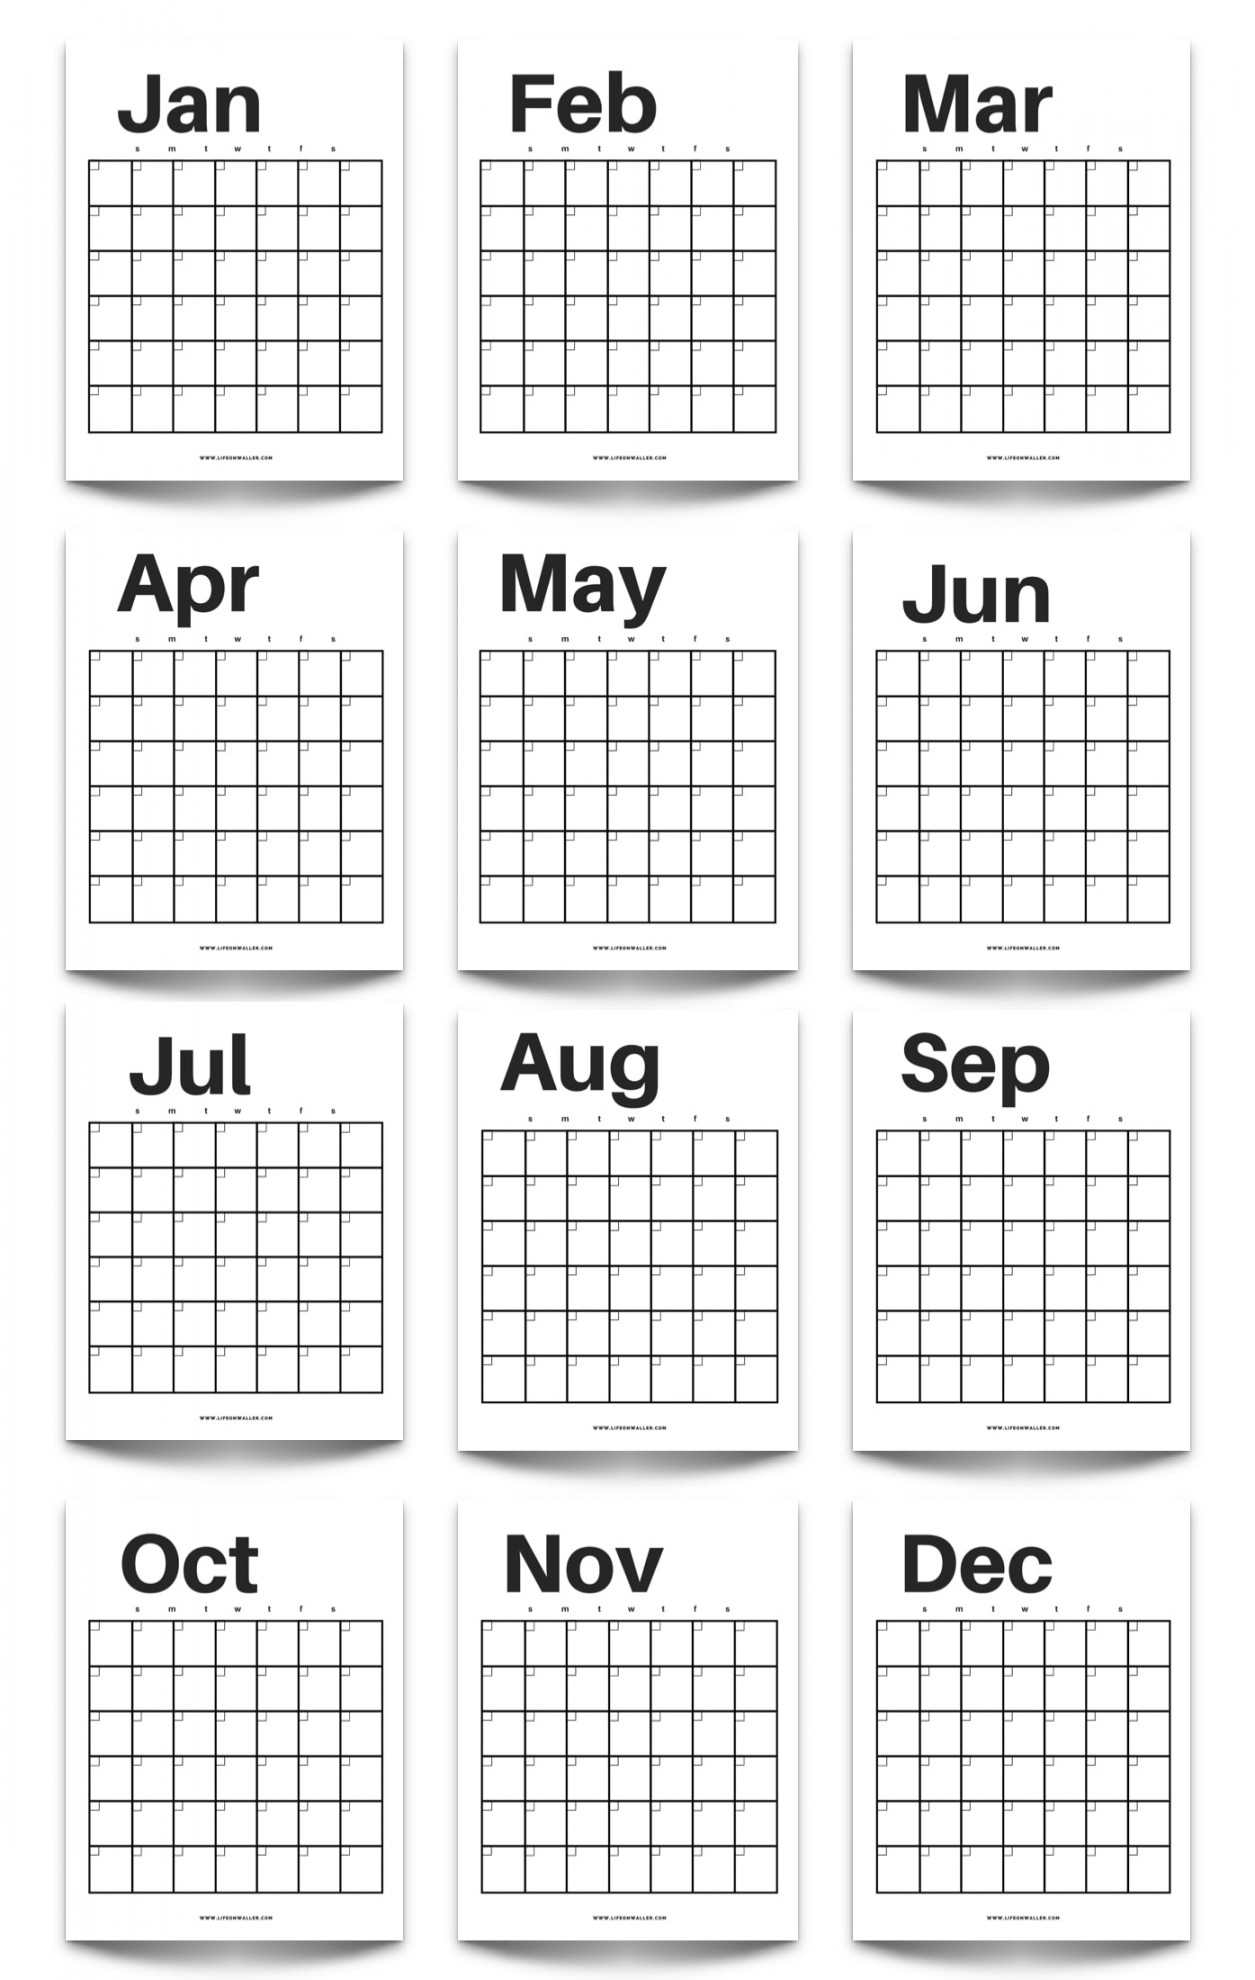 Free Printable Modern Minimalist Fill in Calendar - Use For Any Year